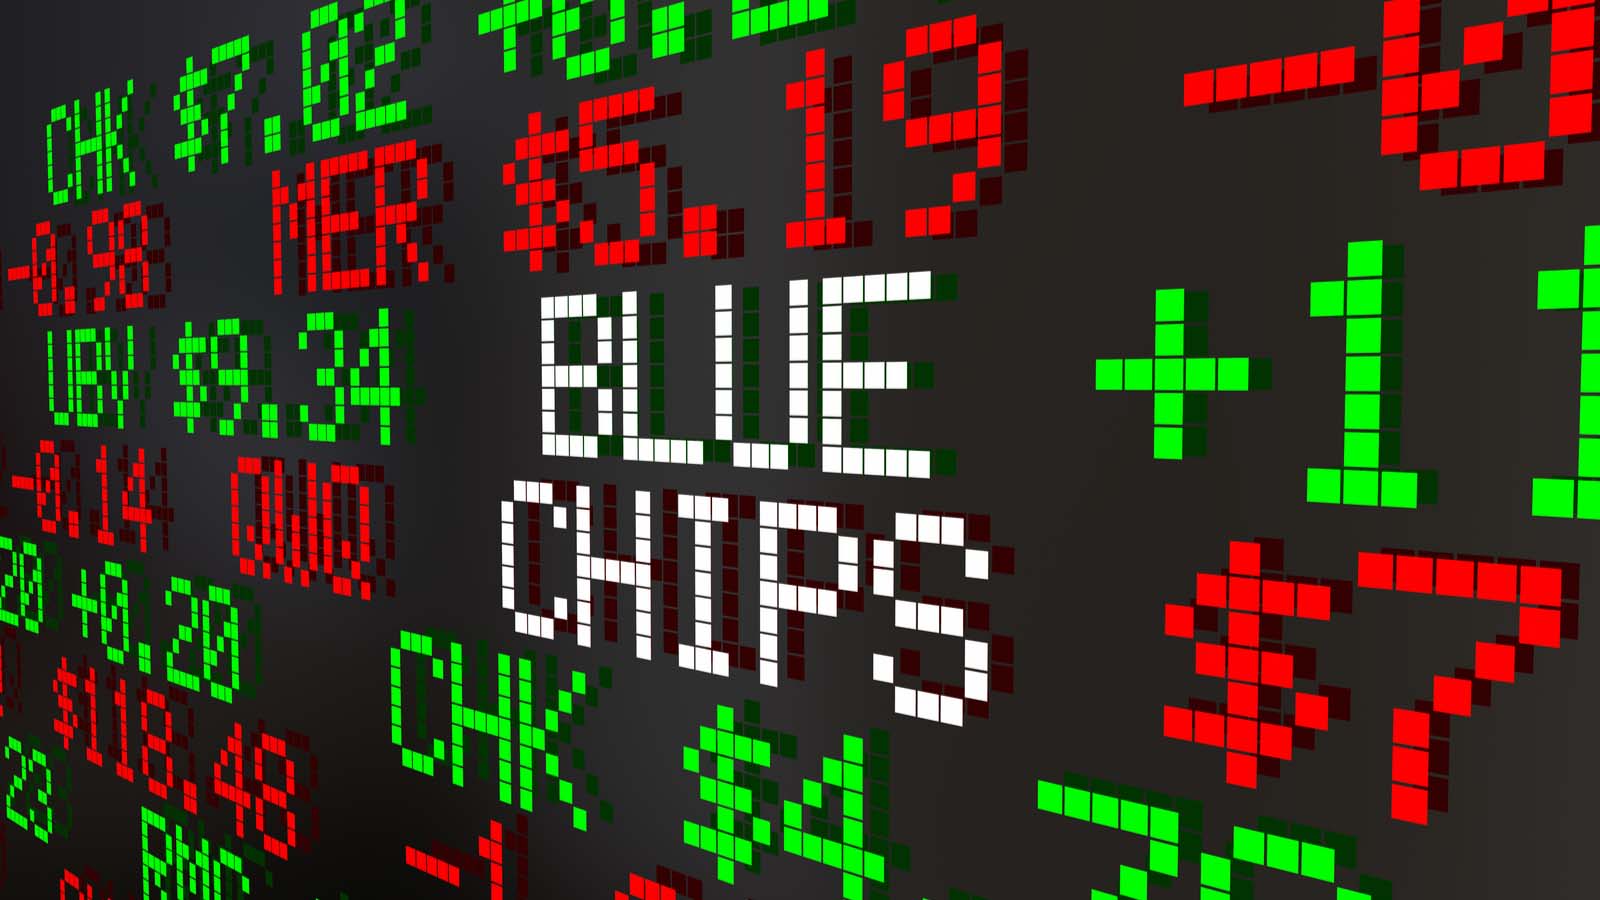 Blue-Chip Blunders: 7 Stocks to Sell as Management Missteps Mount